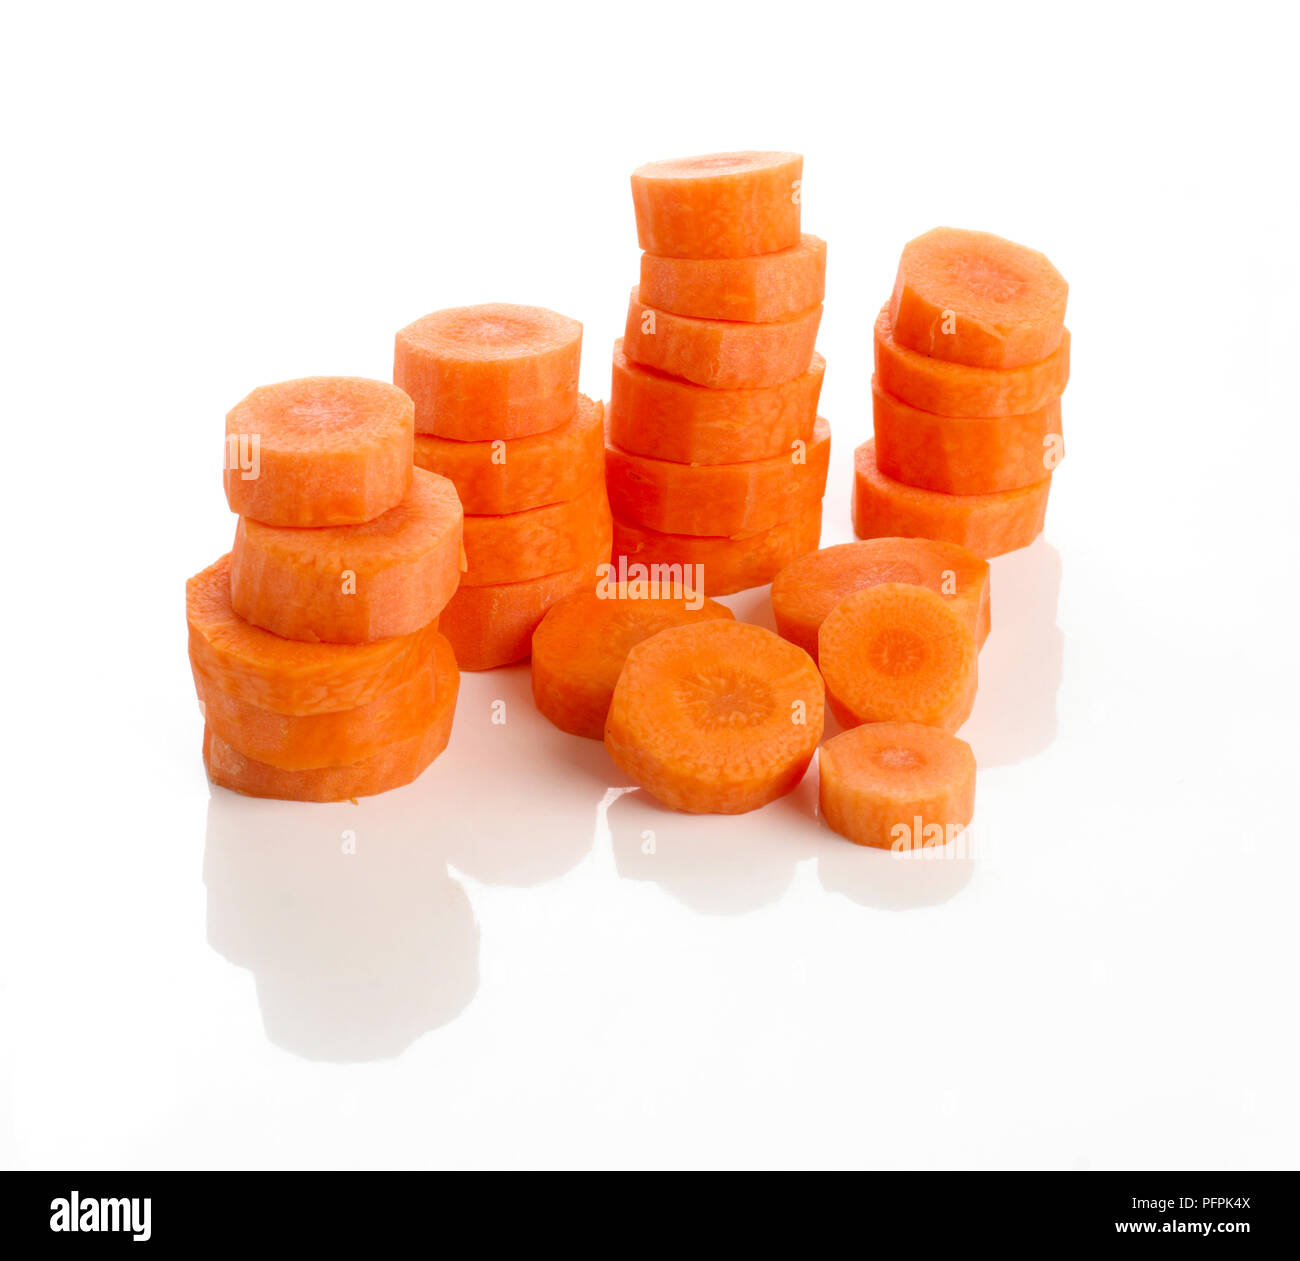 Stacks of carrot slices Stock Photo